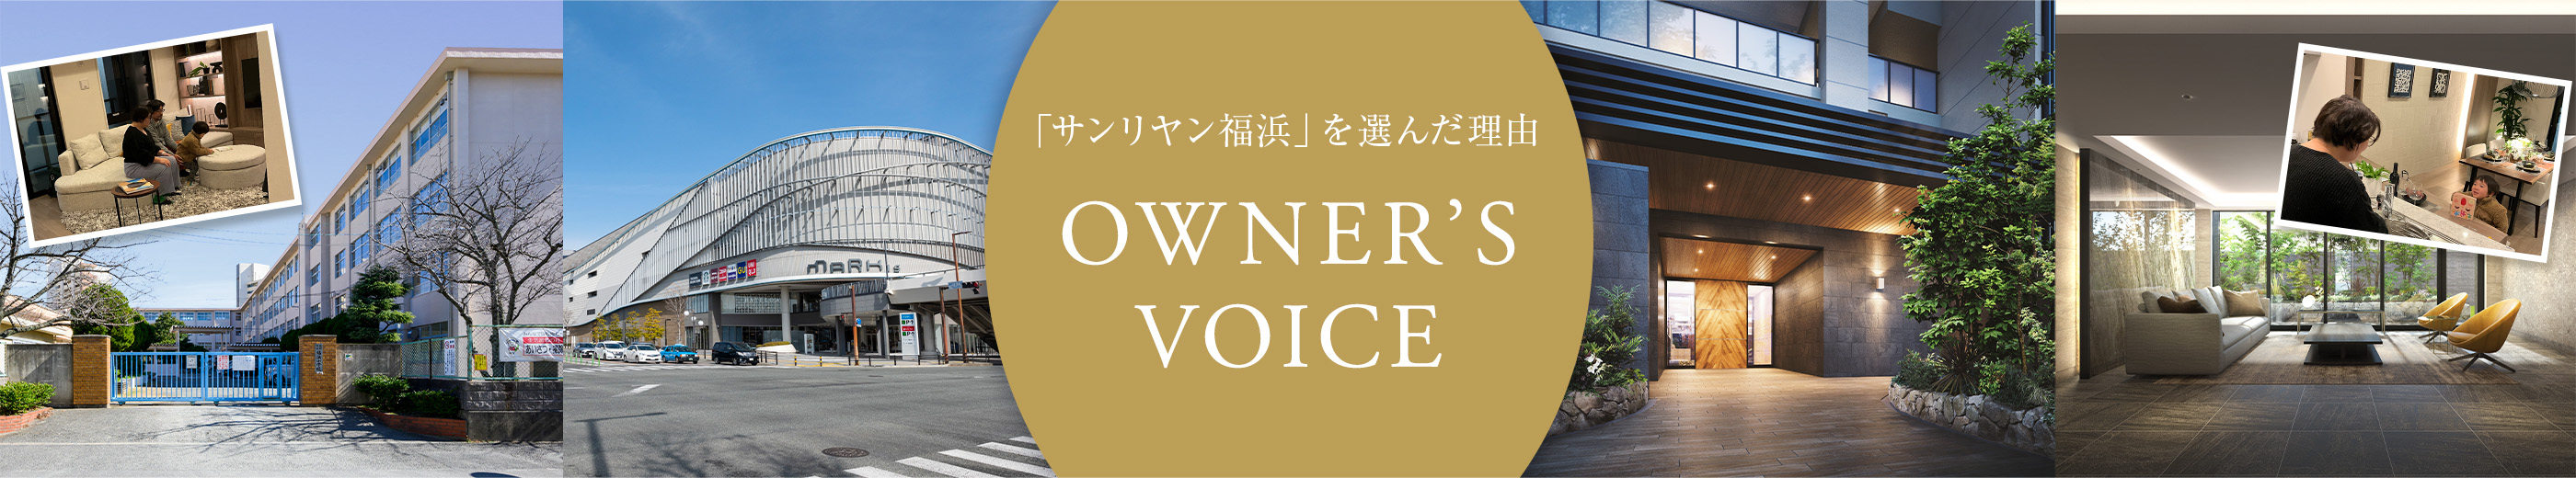 OWNER’S VOICE